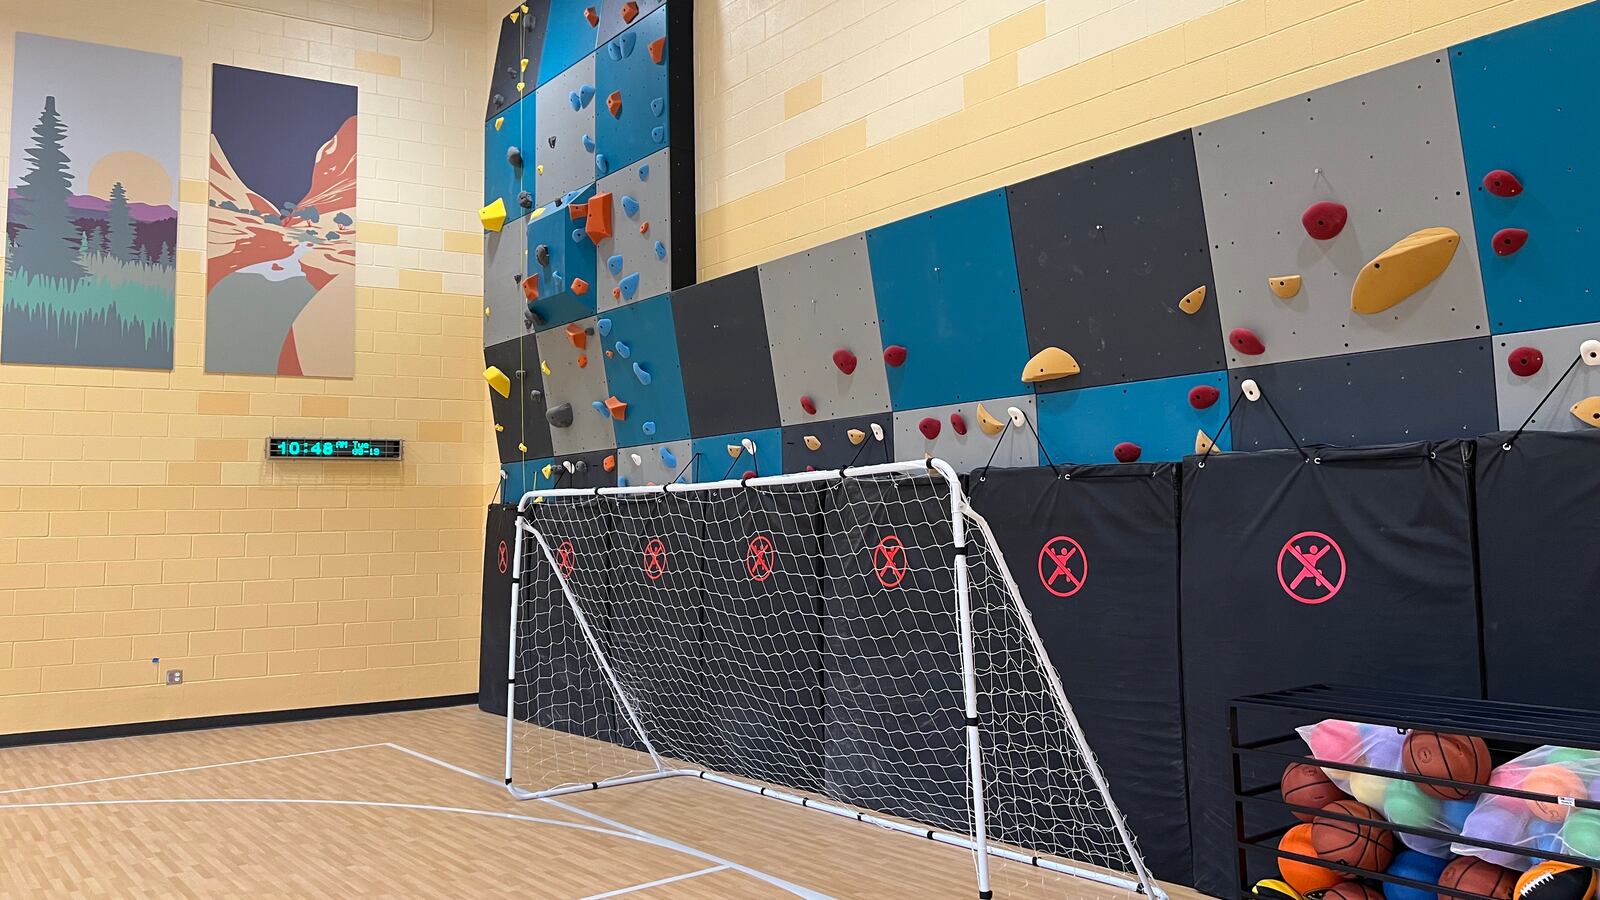 A multicolored climbing wall in the corner of a gymnasium.